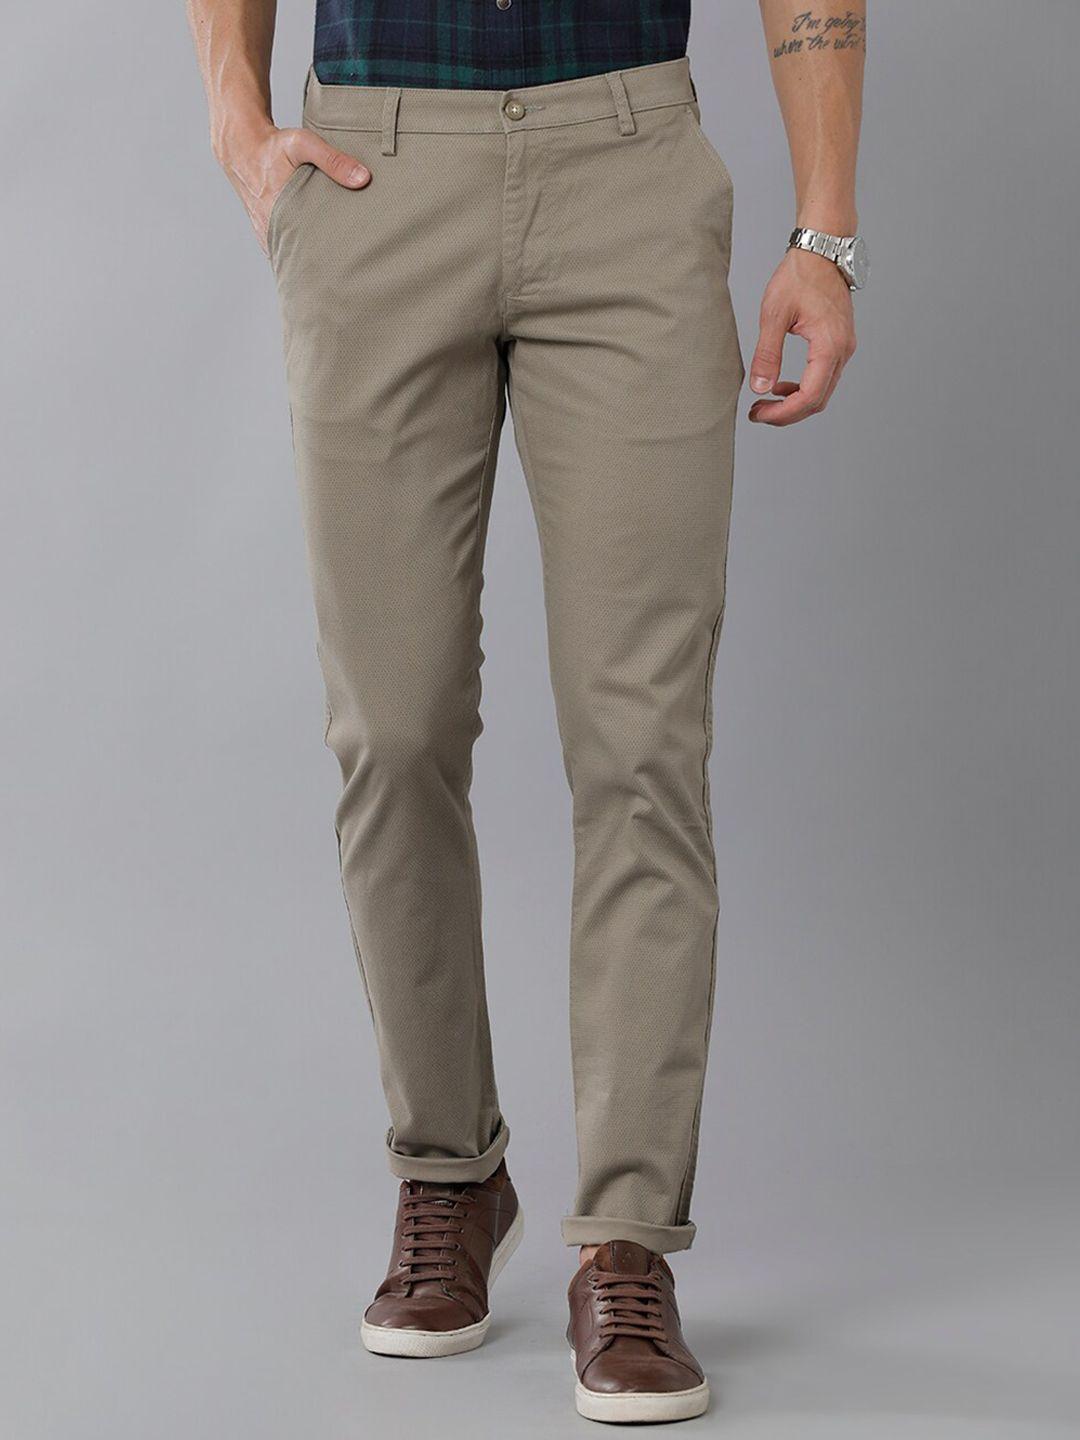 classic polo men cotton classic slim fit chinos trousers